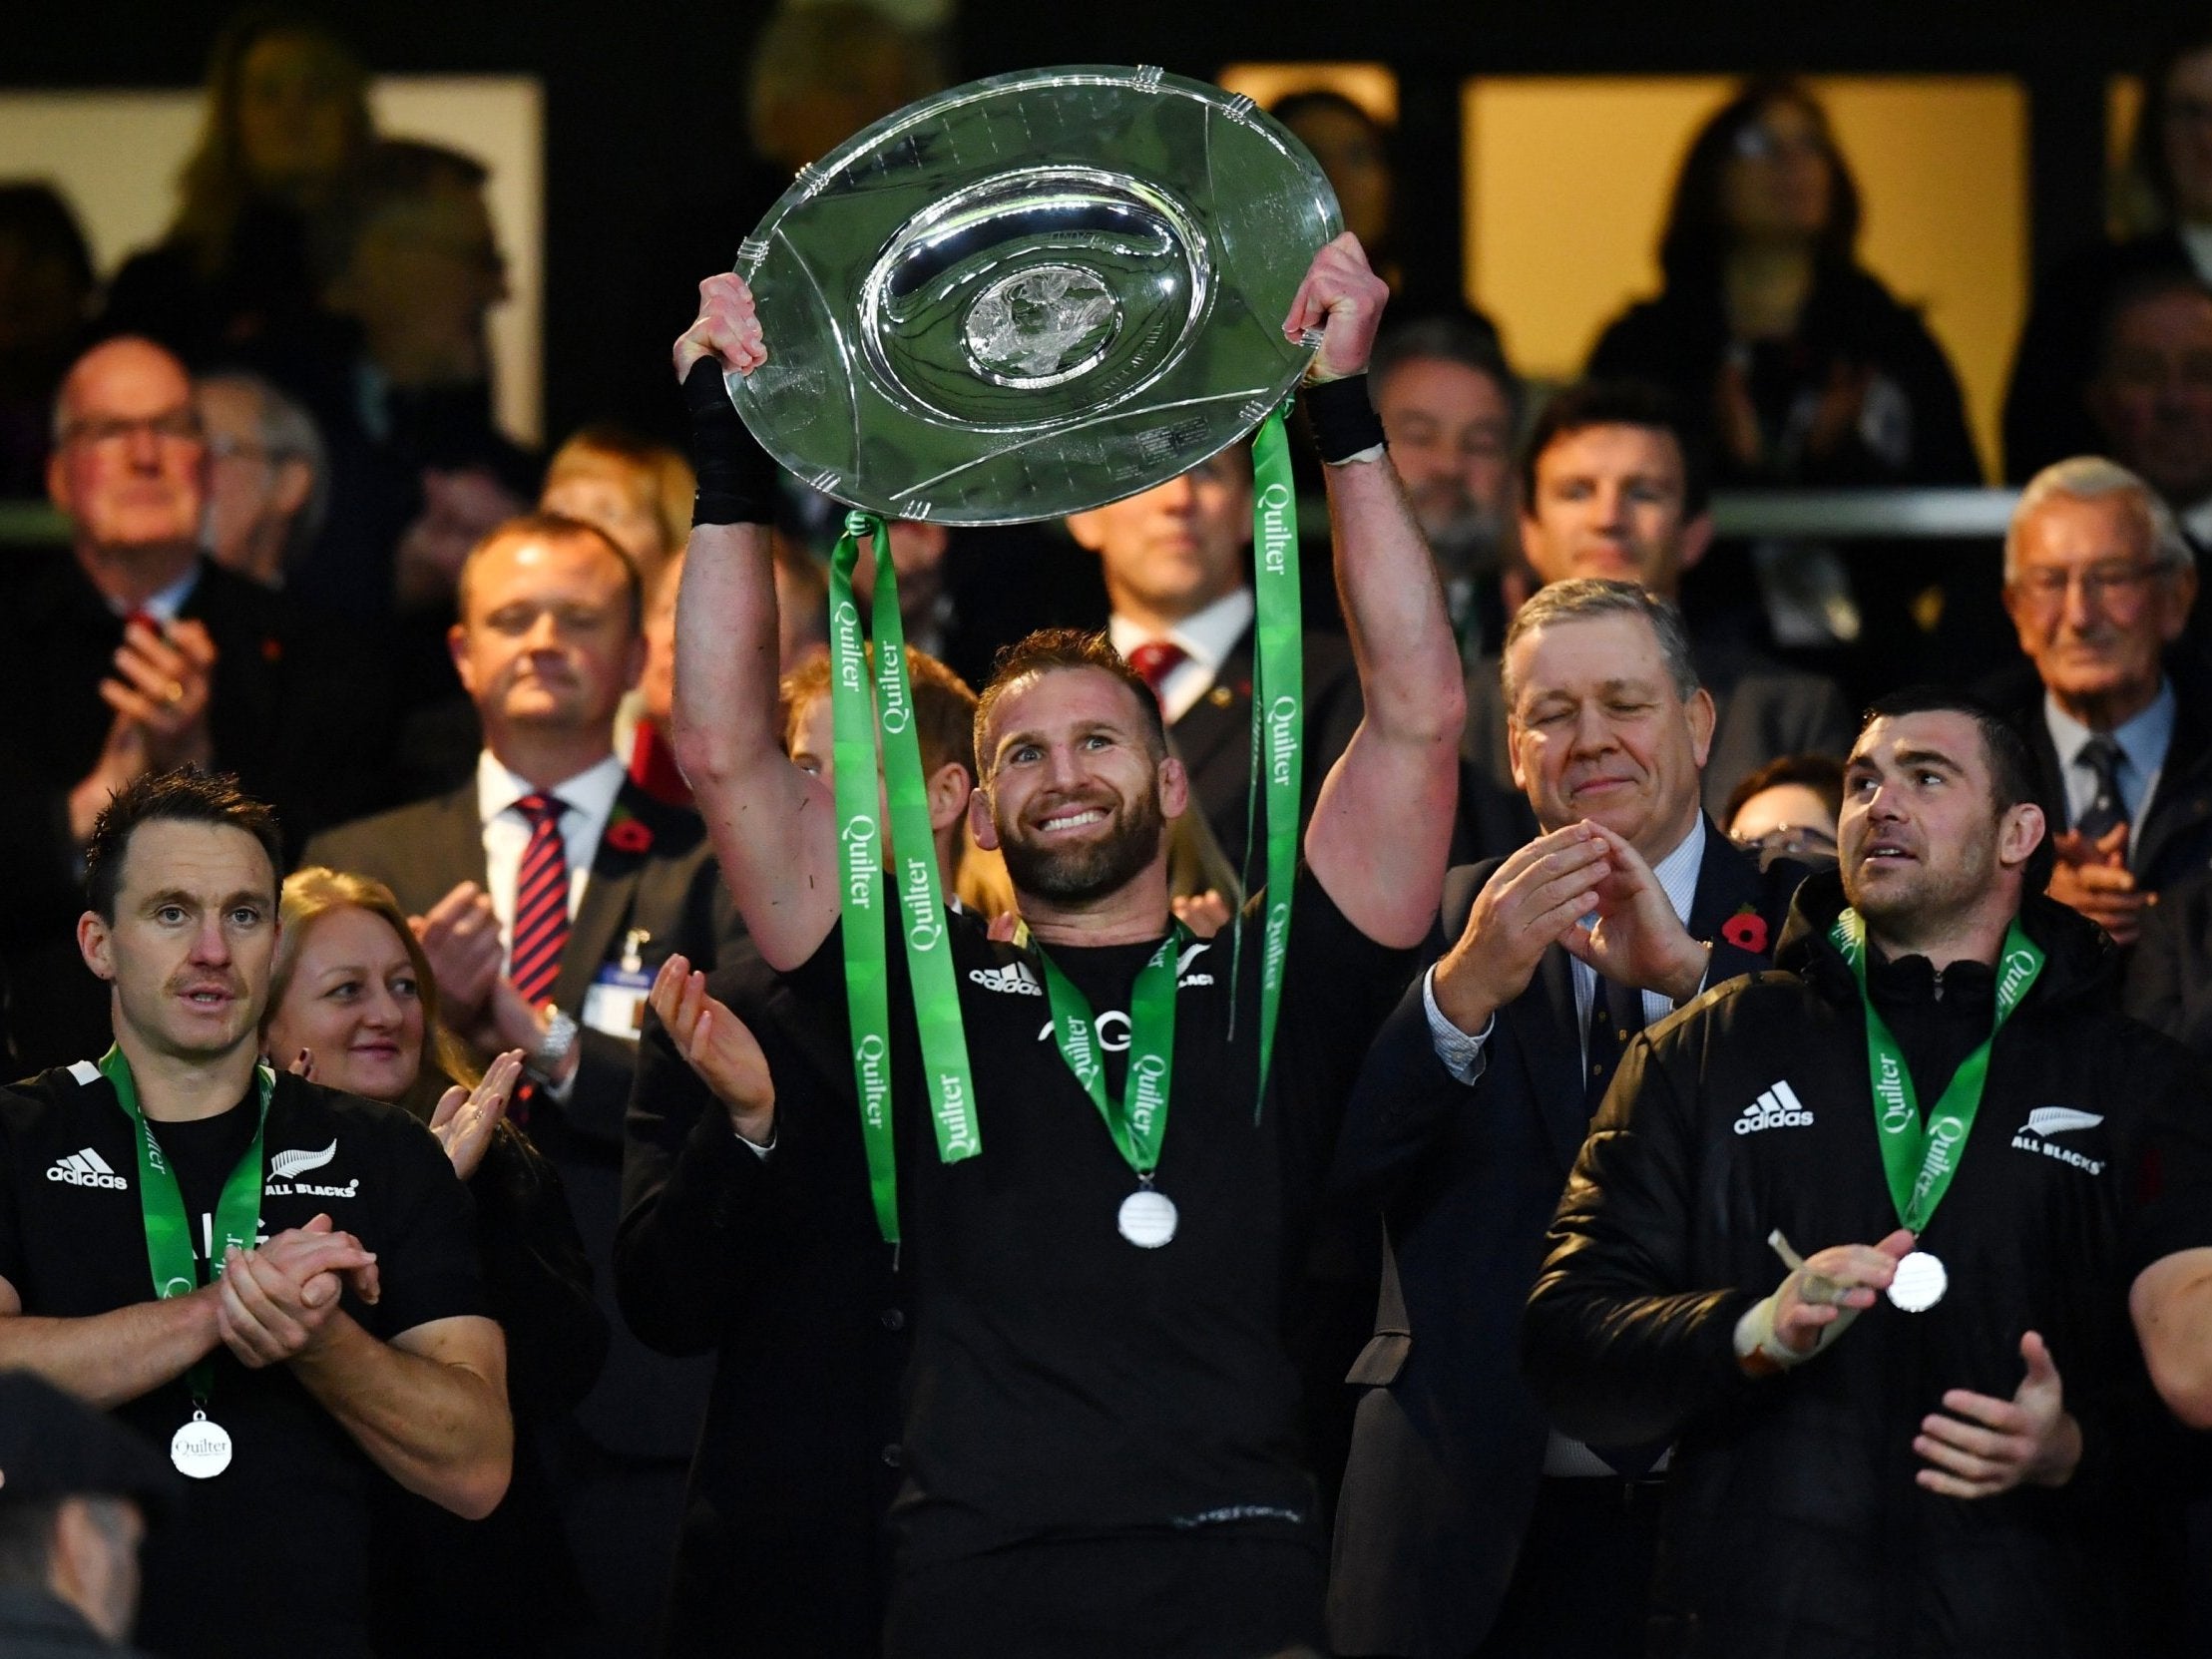 New Zealand's Kieran Read lifts the trophy after the match